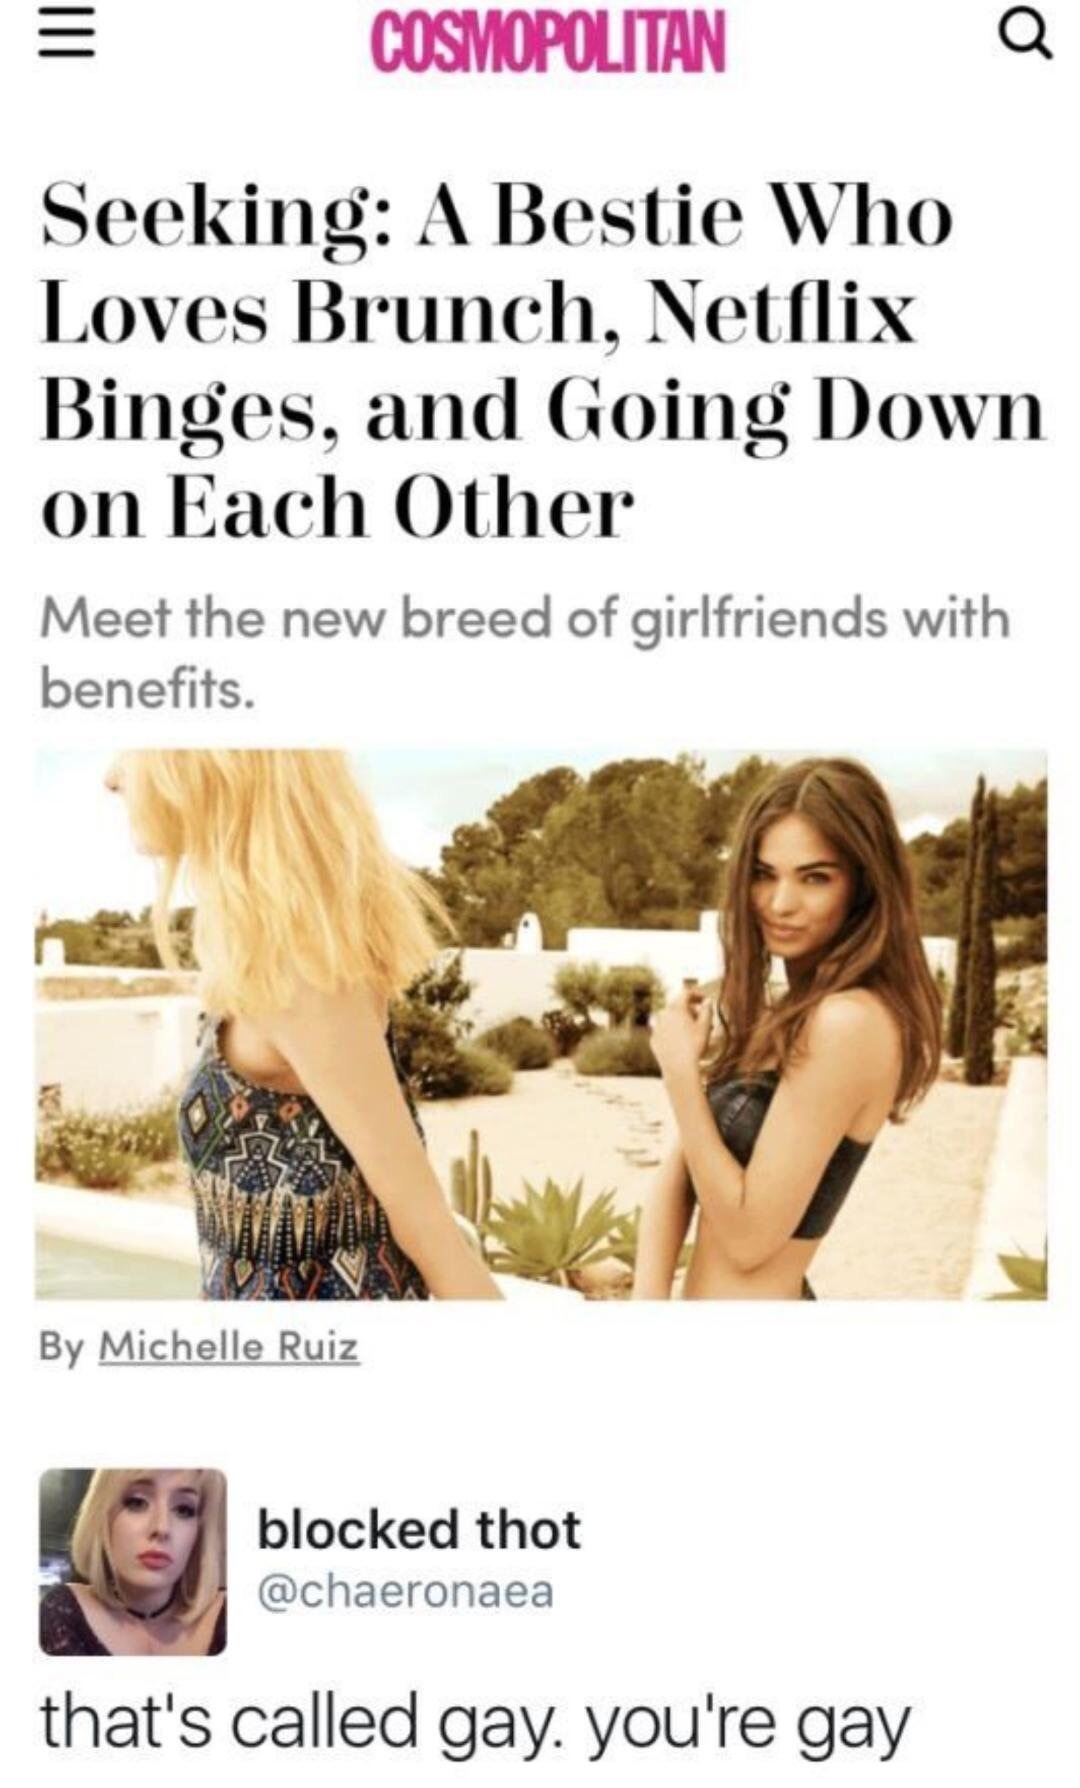 thats gay you re gay - Cosimopolitan Seeking A Bestie Who Loves Brunch, Netflix Binges, and Going Down on Each Other Meet the new breed of girlfriends with benefits. By Michelle Ruiz R ache blocked thot that's called gay. you're gay